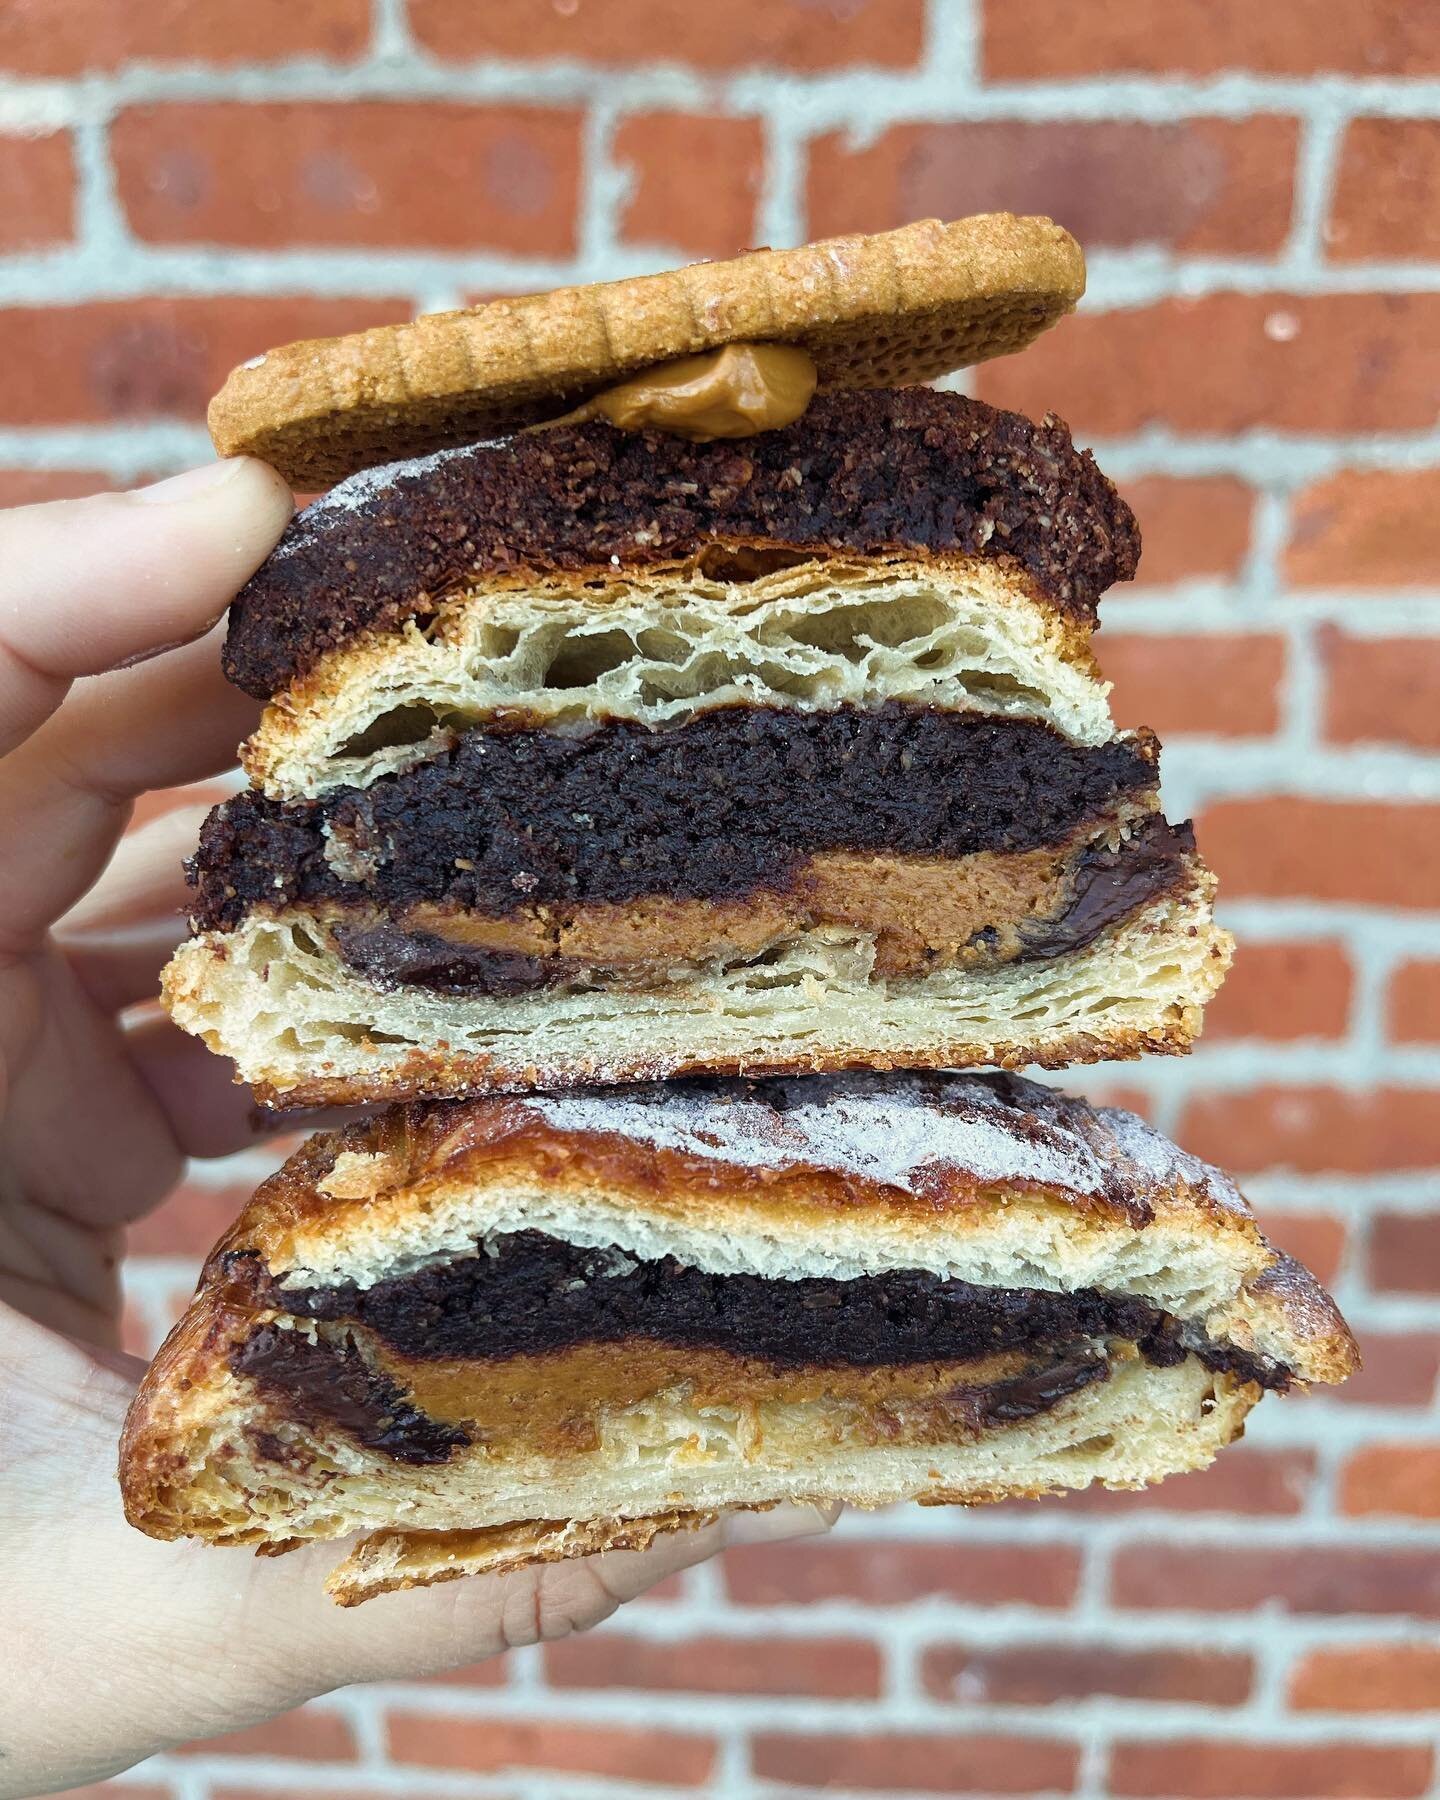 Cookie Butter Strikes Back! This is our twice baked cookie butter croissant 2.0 featuring crunchy @lotusbiscoffus cookie butter, chocolate almond frangipane, cookie butter pastry cream (yum!) topped with Maldon Salt and a whole biscoff cookie!
These 